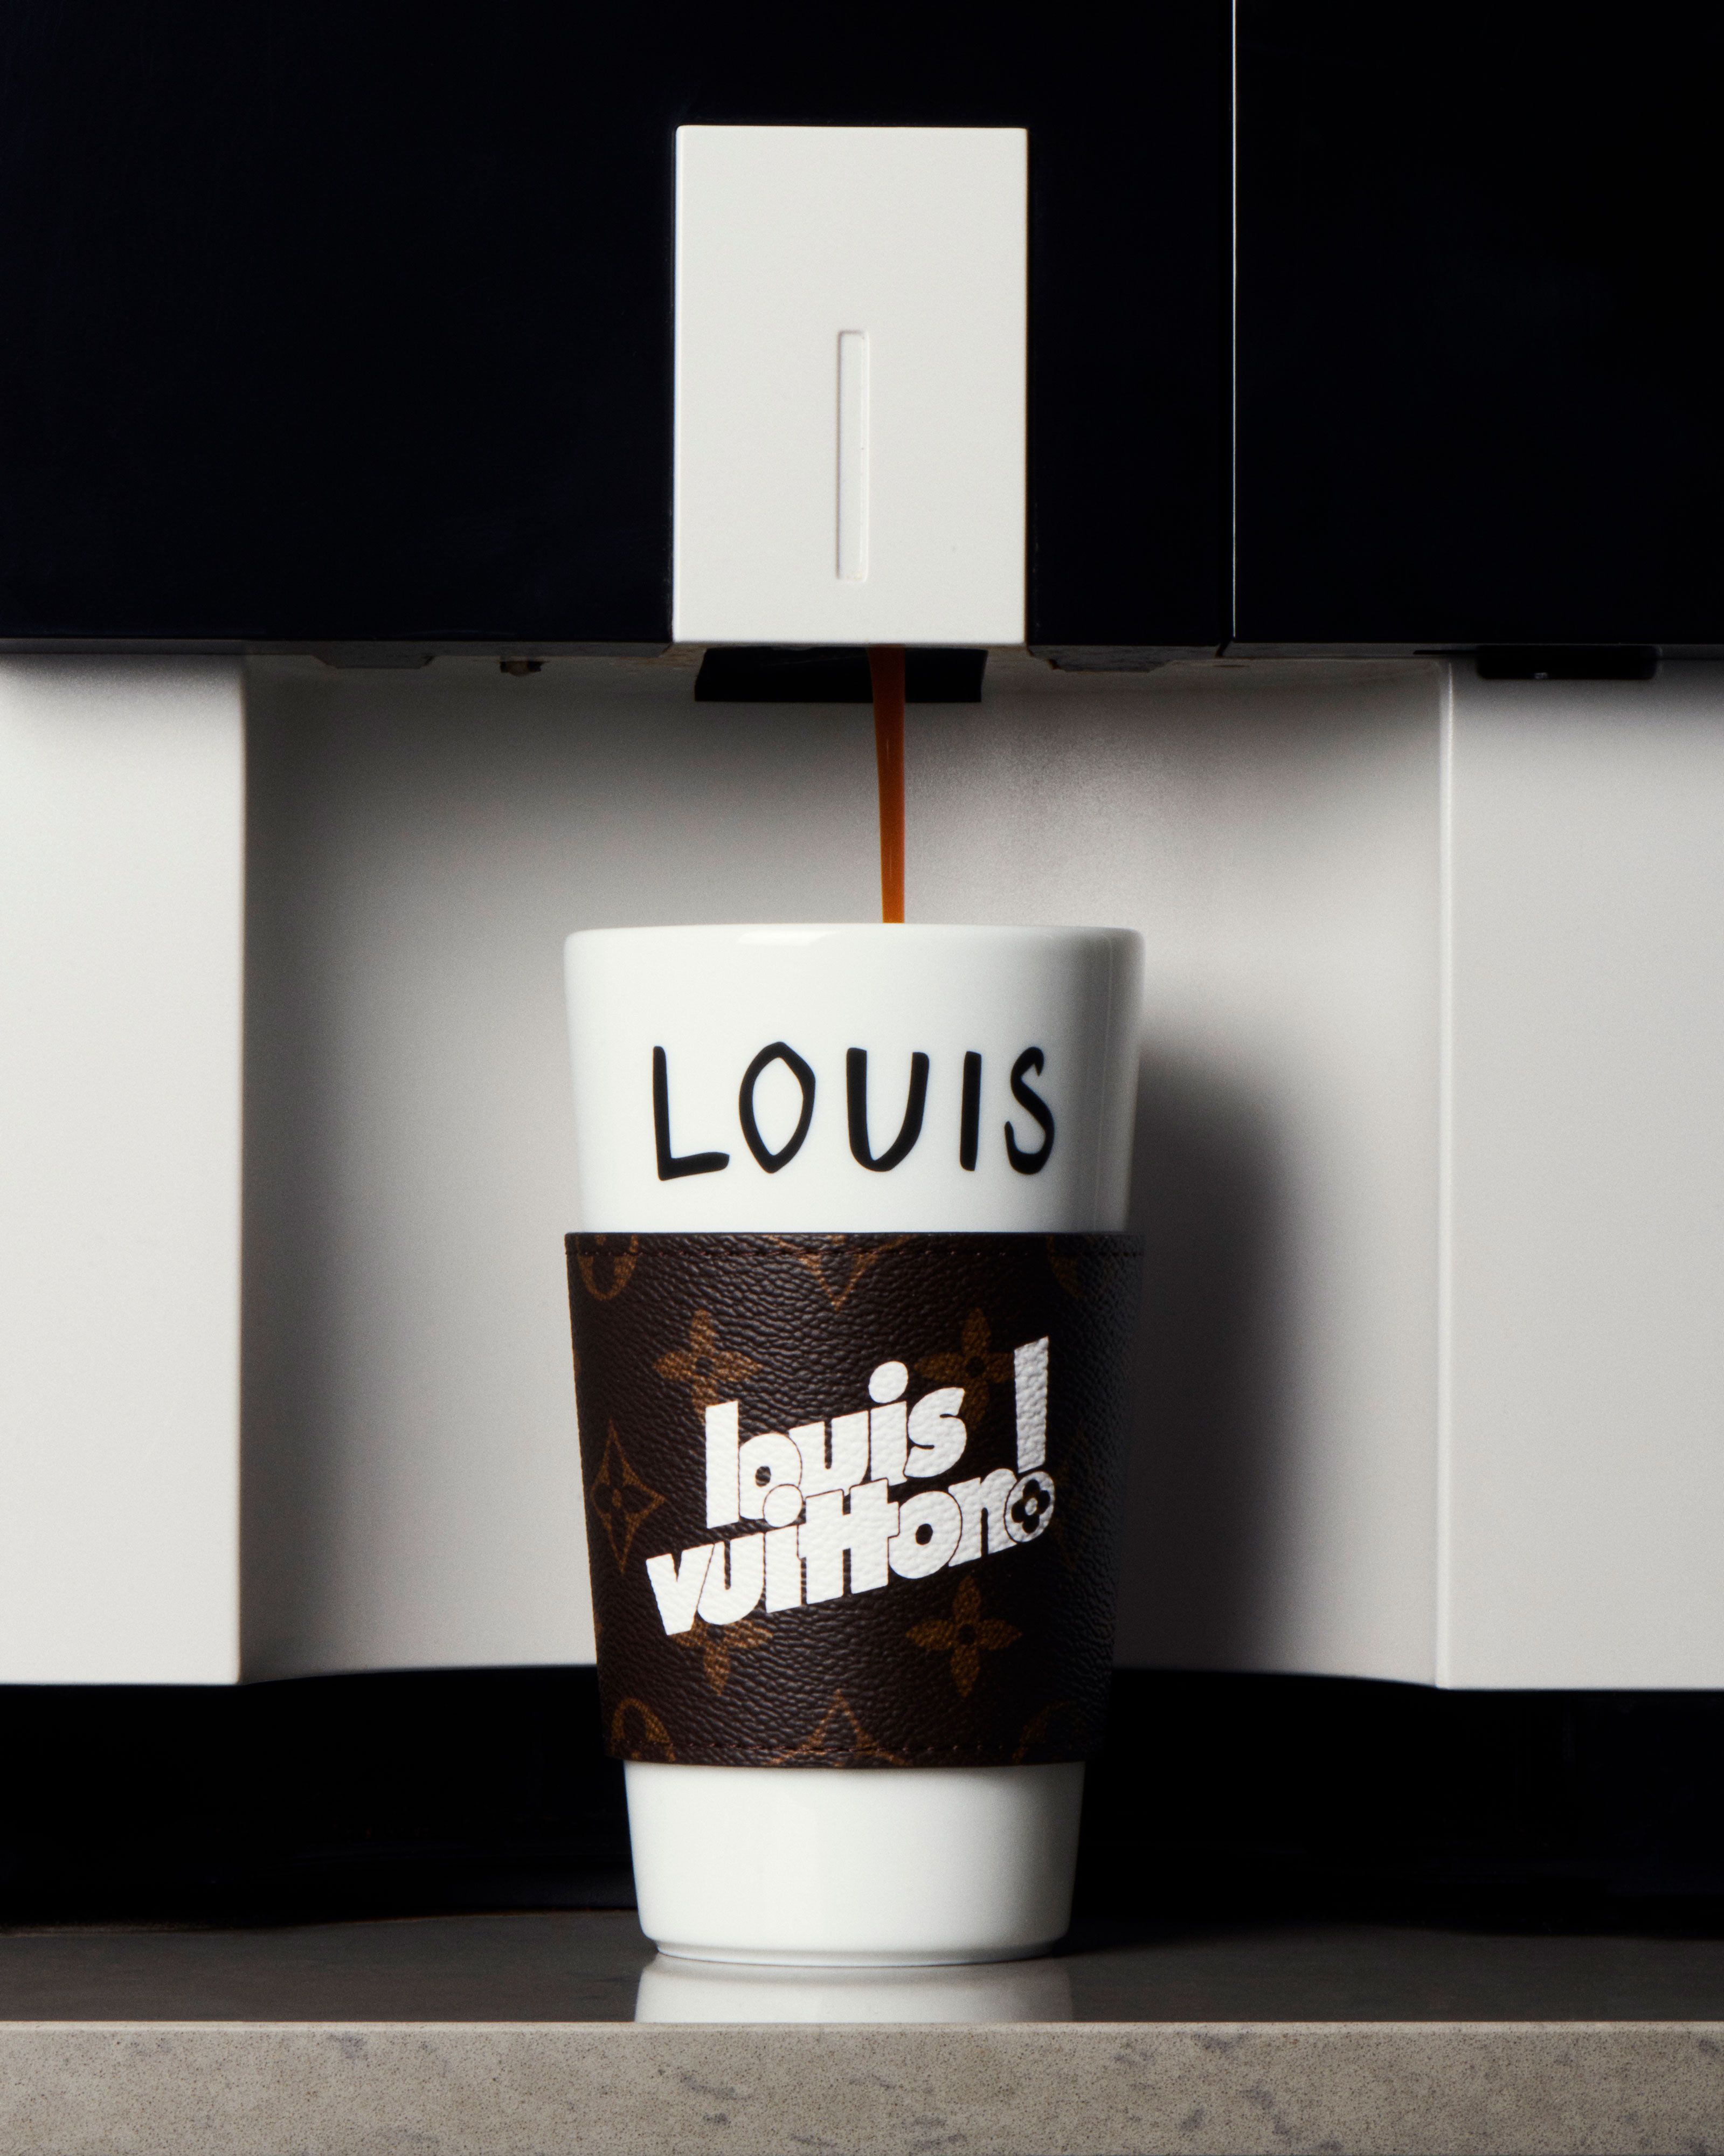 I BOUGHT THE LOUIS VUITTON COFFEE CUP BAG - FULL REVIEW, WHAT FITS & MORE